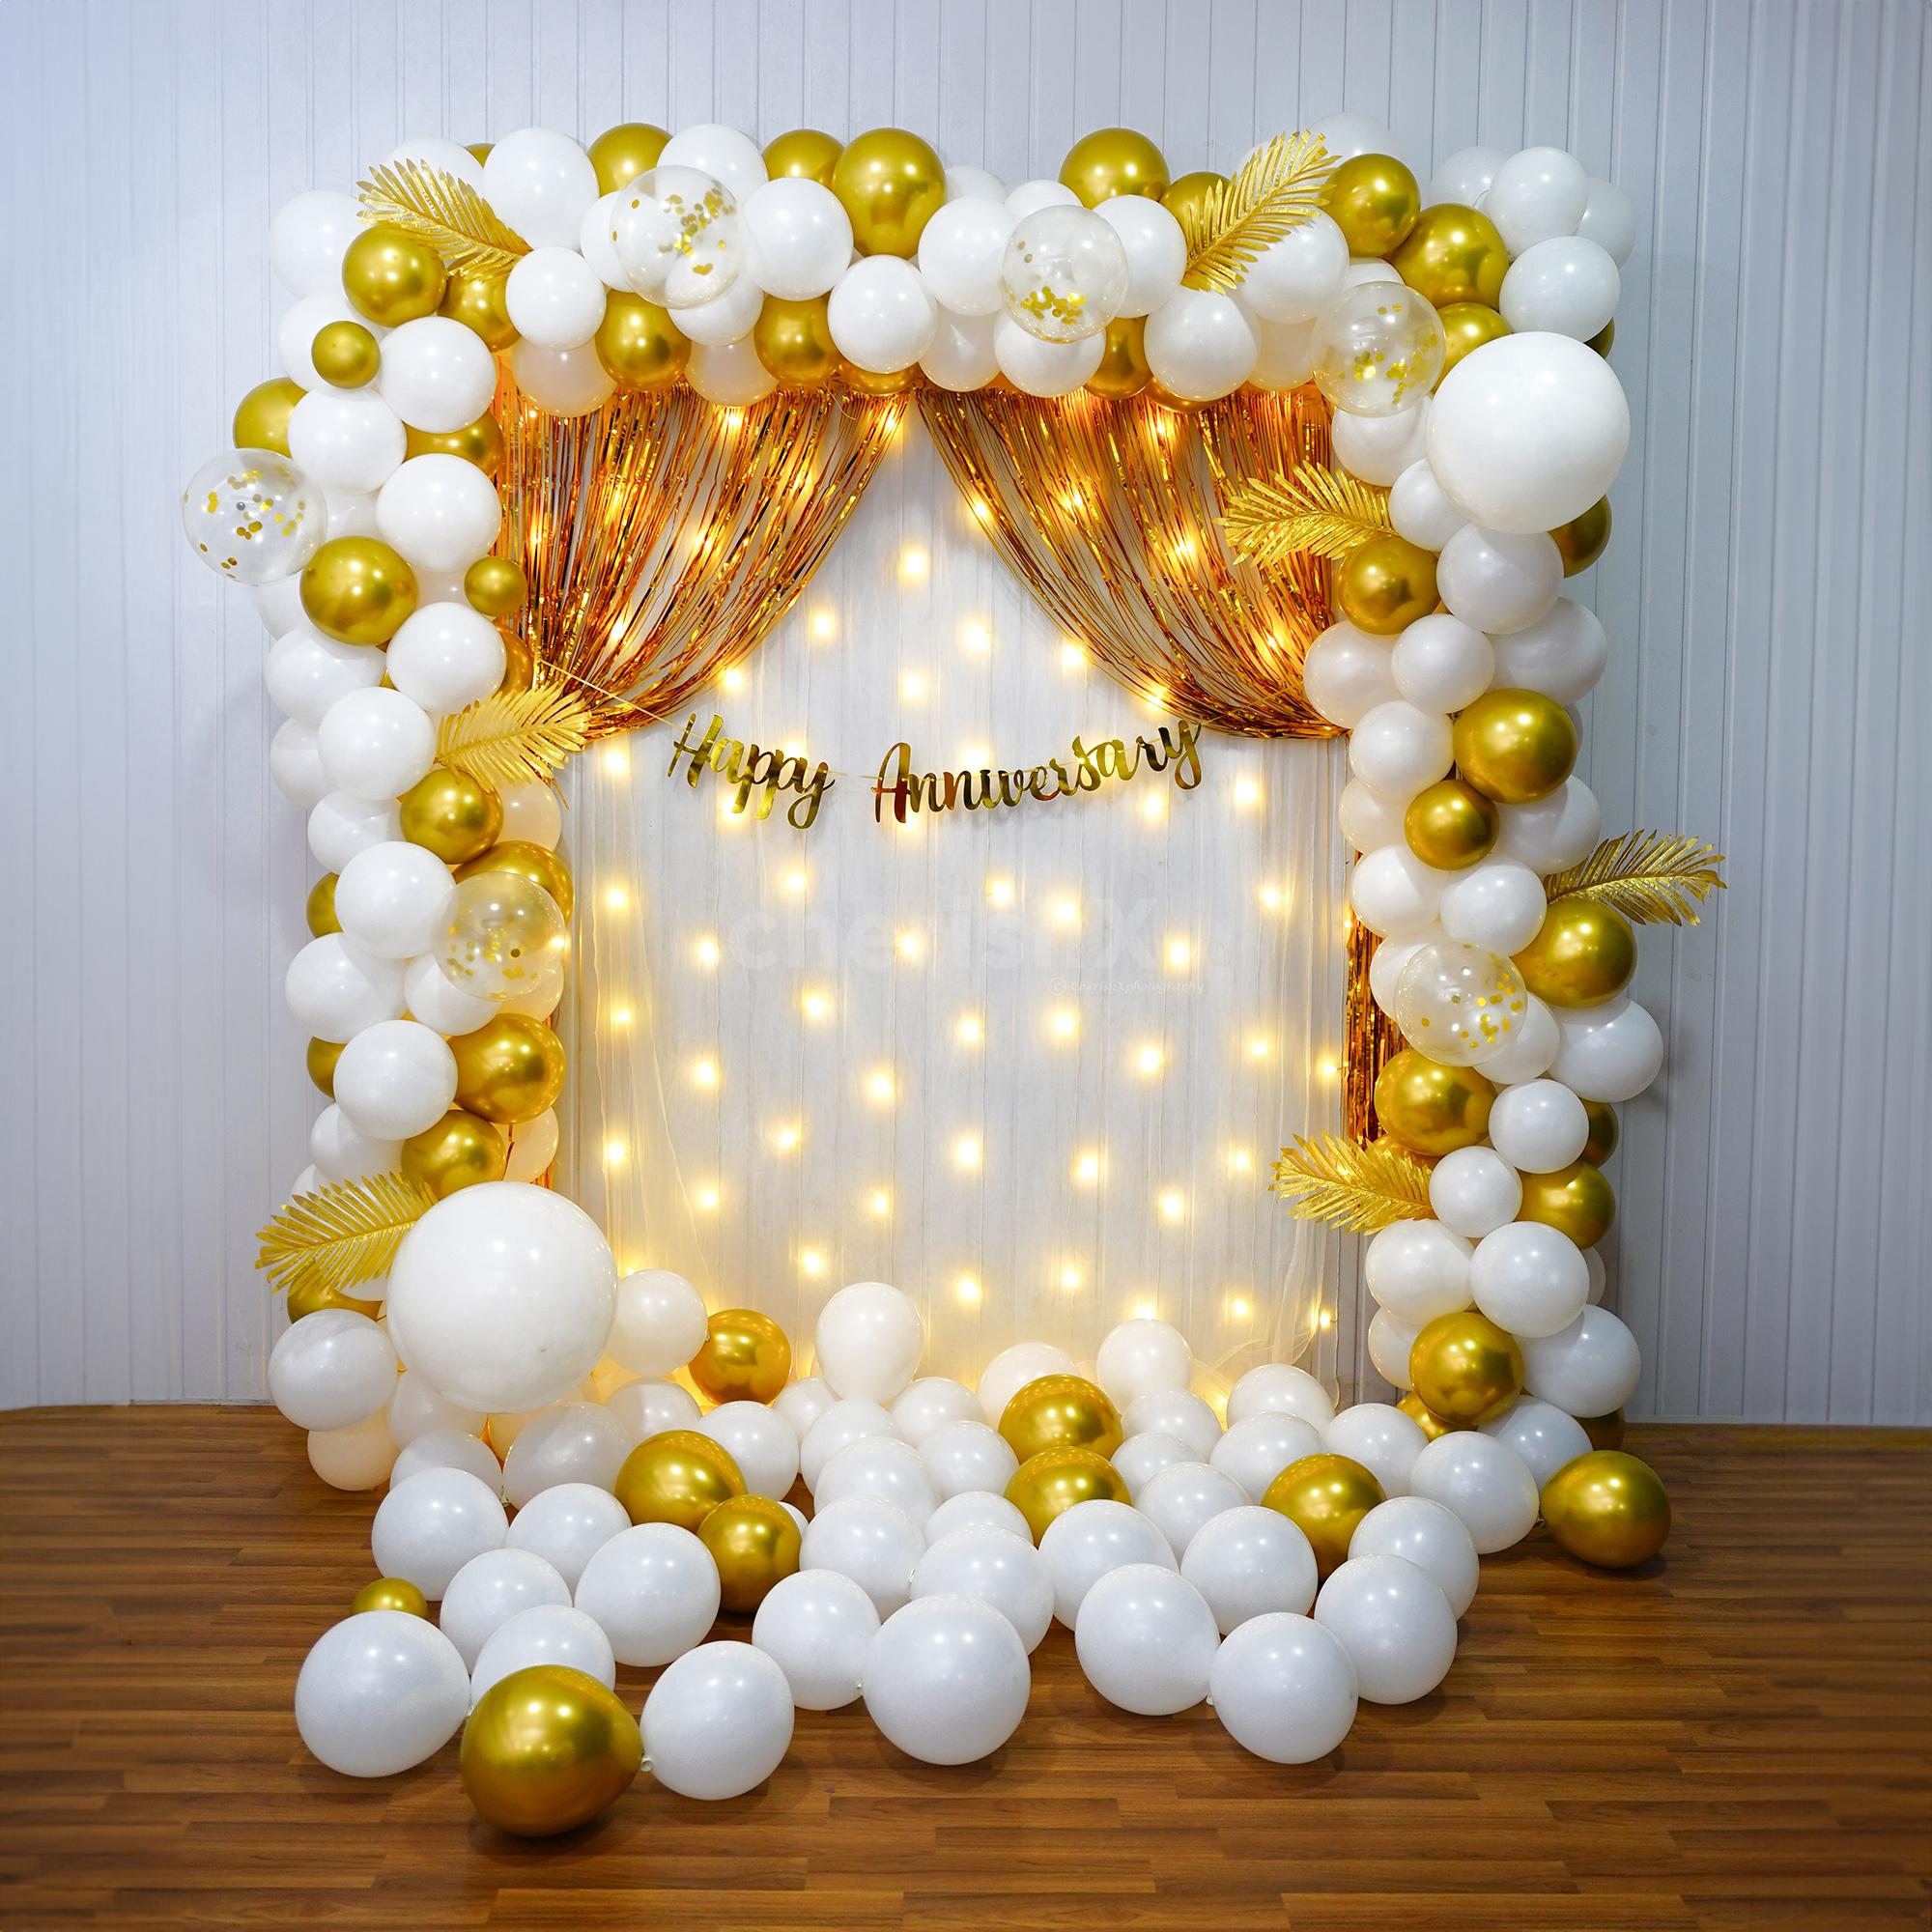 Celebrate your love with our White & Gold Anniversary Decorations ...